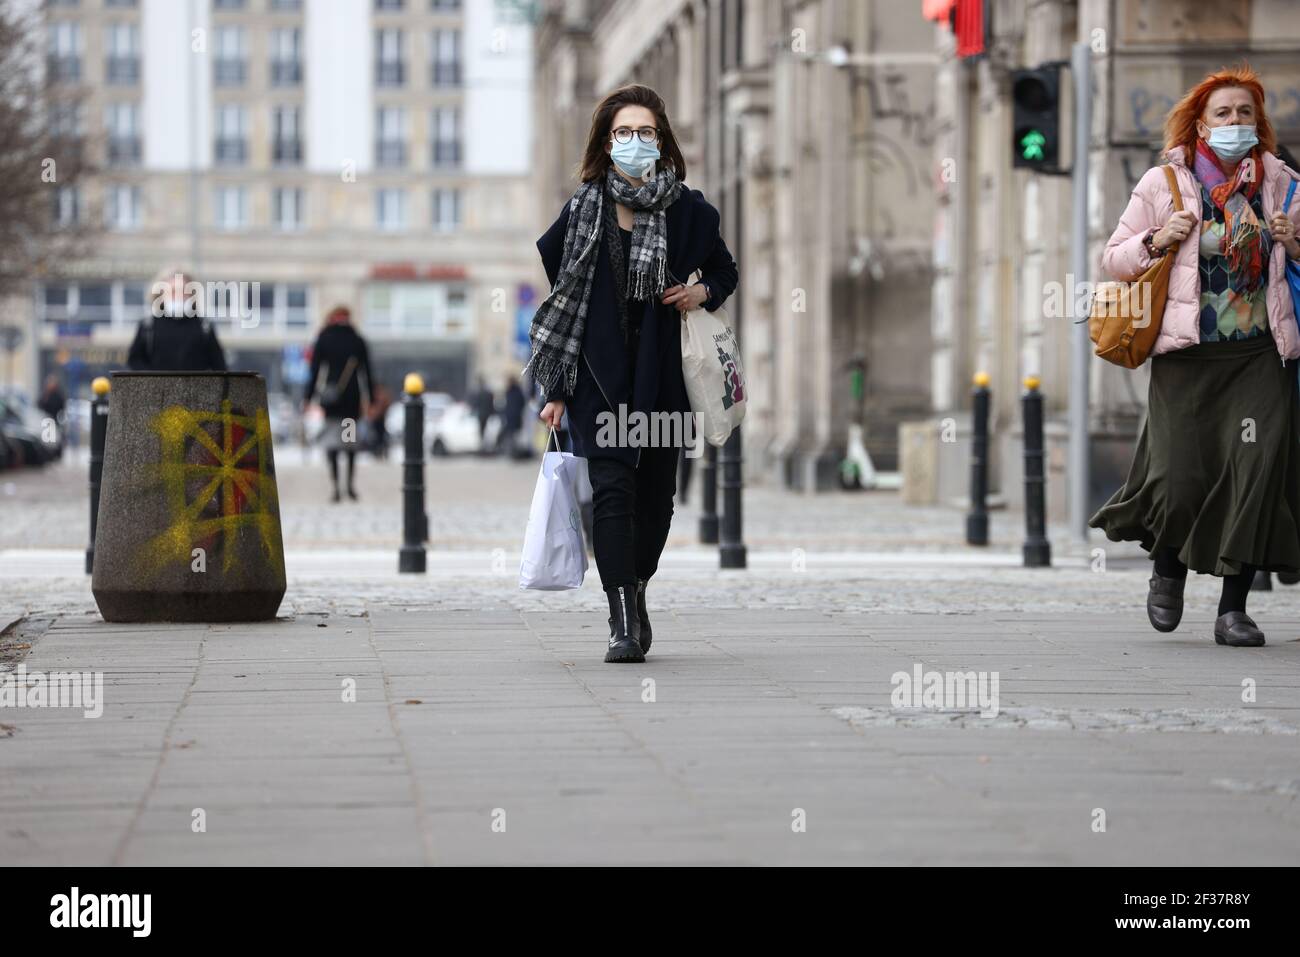 Warsaw, Poland. 15th Mar, 2021. A woman wearing a mask walks in central Warsaw, Poland, on March 15, 2021. The Polish government reintroduced lockdown measures in Warsaw on Monday. According to Polish Health Minister Adam Niedzielski, the lockdown is in force from March 15 to March 28. Hotels, cultural institutions and sports facilities are shut down and the operation of shopping centers is also be restricted. Credit: Jaap Arriens/Xinhua/Alamy Live News Stock Photo